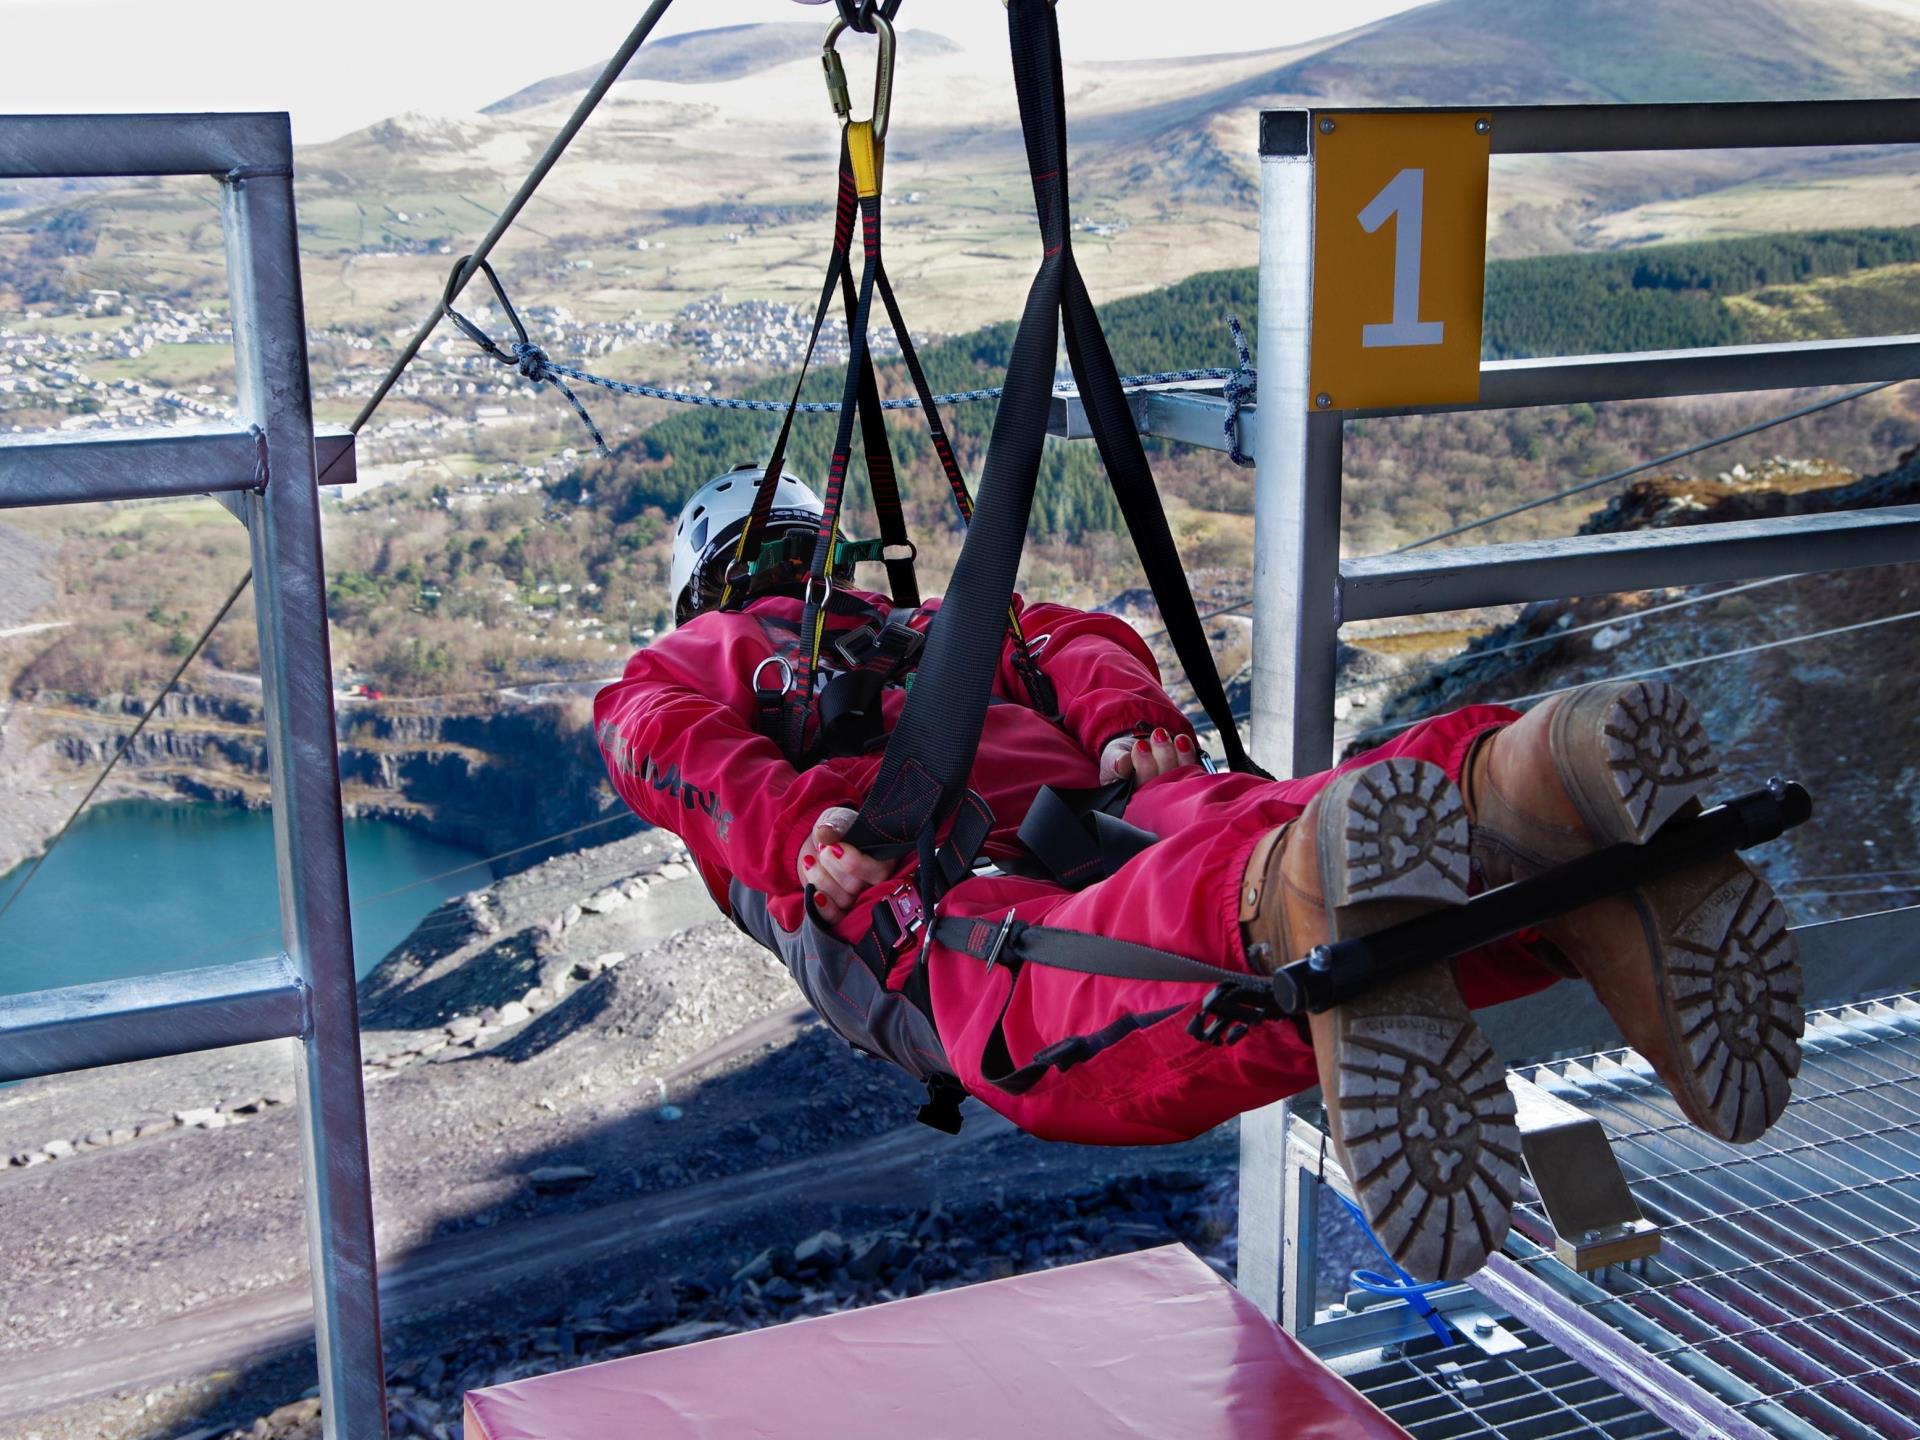 Book your Zipworld and other activities with us